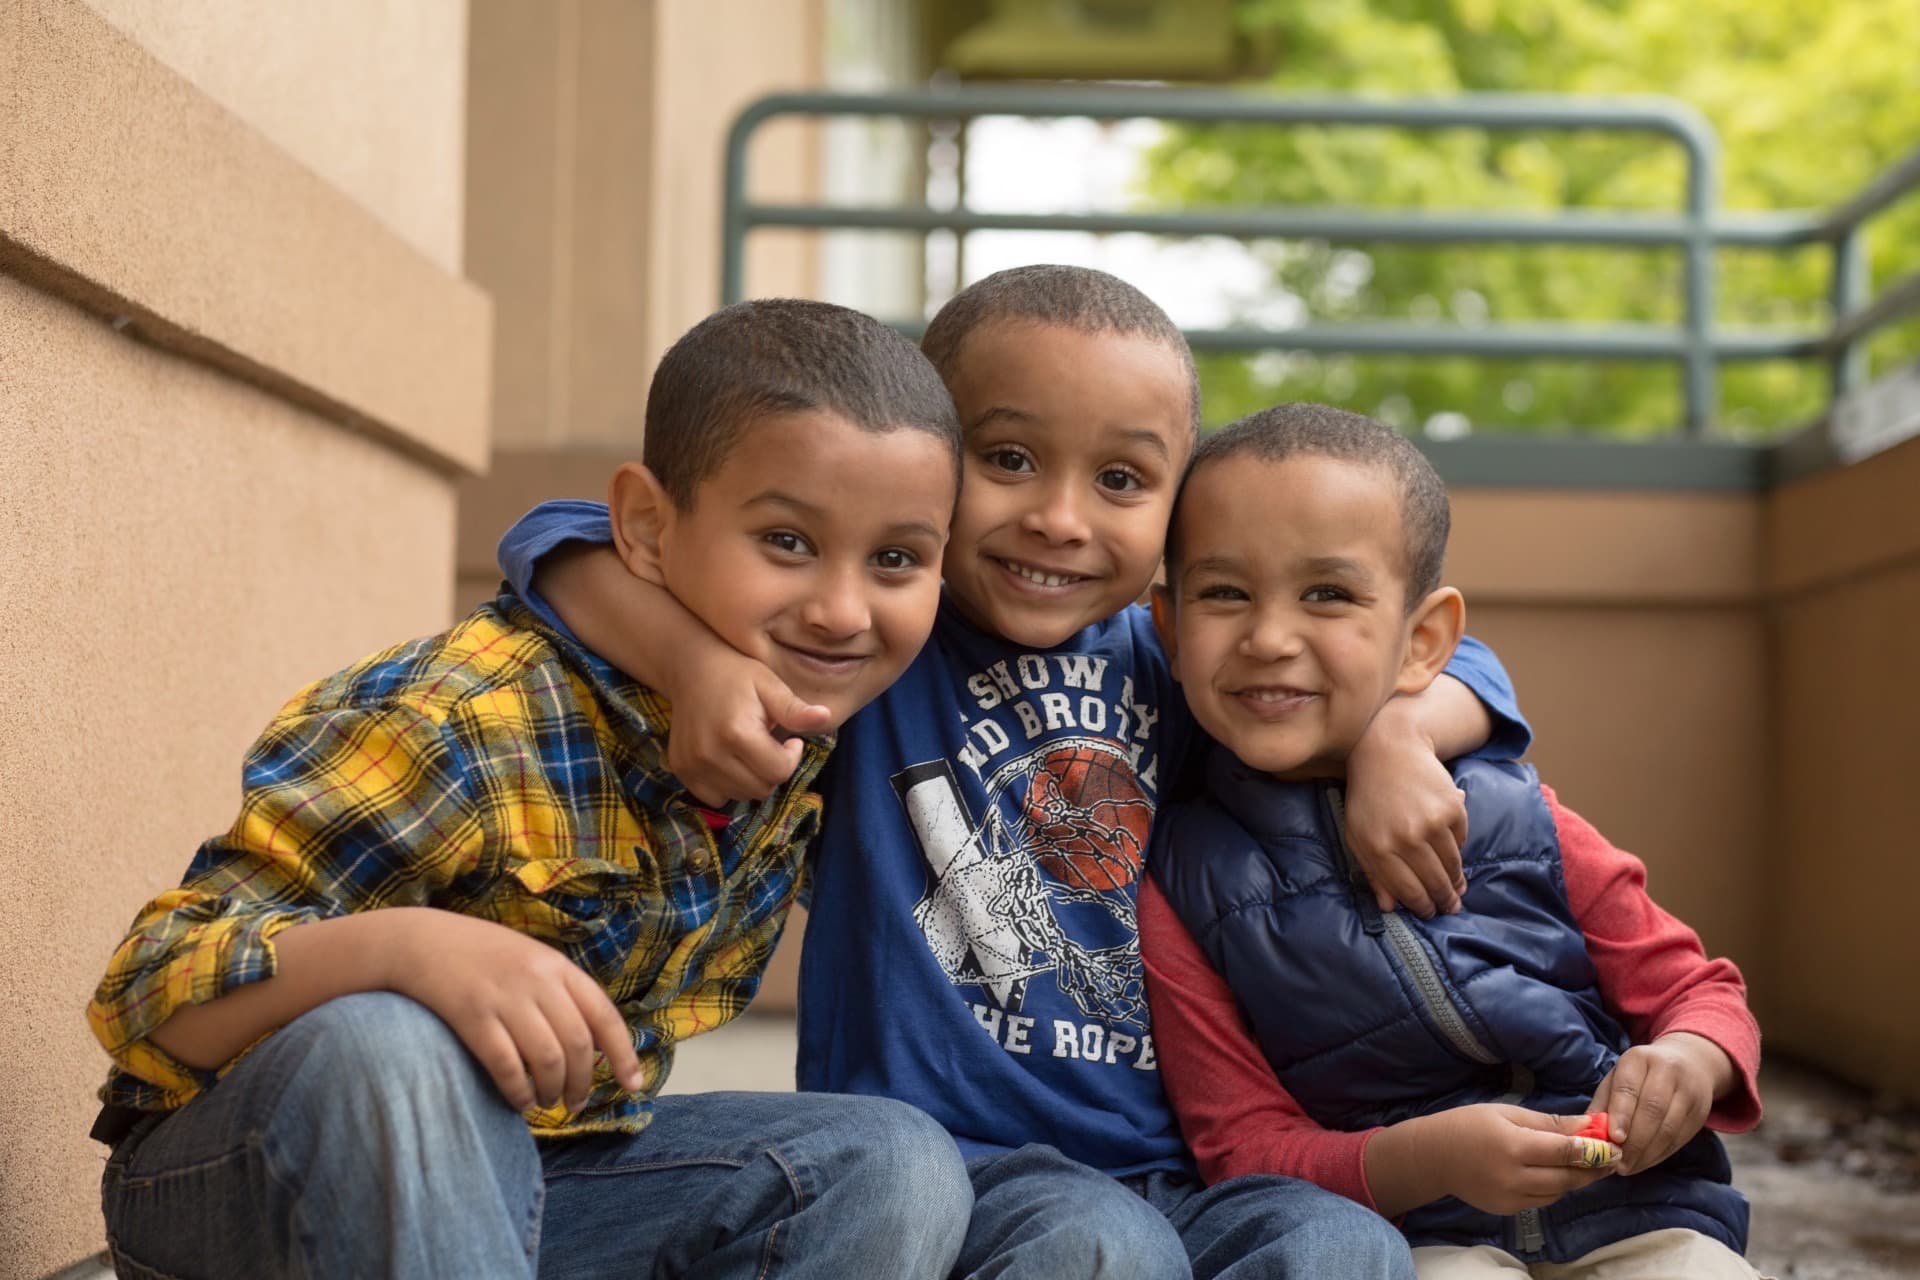 Give every kid a “Best Start”: Vote YES on King County Prop. 1!